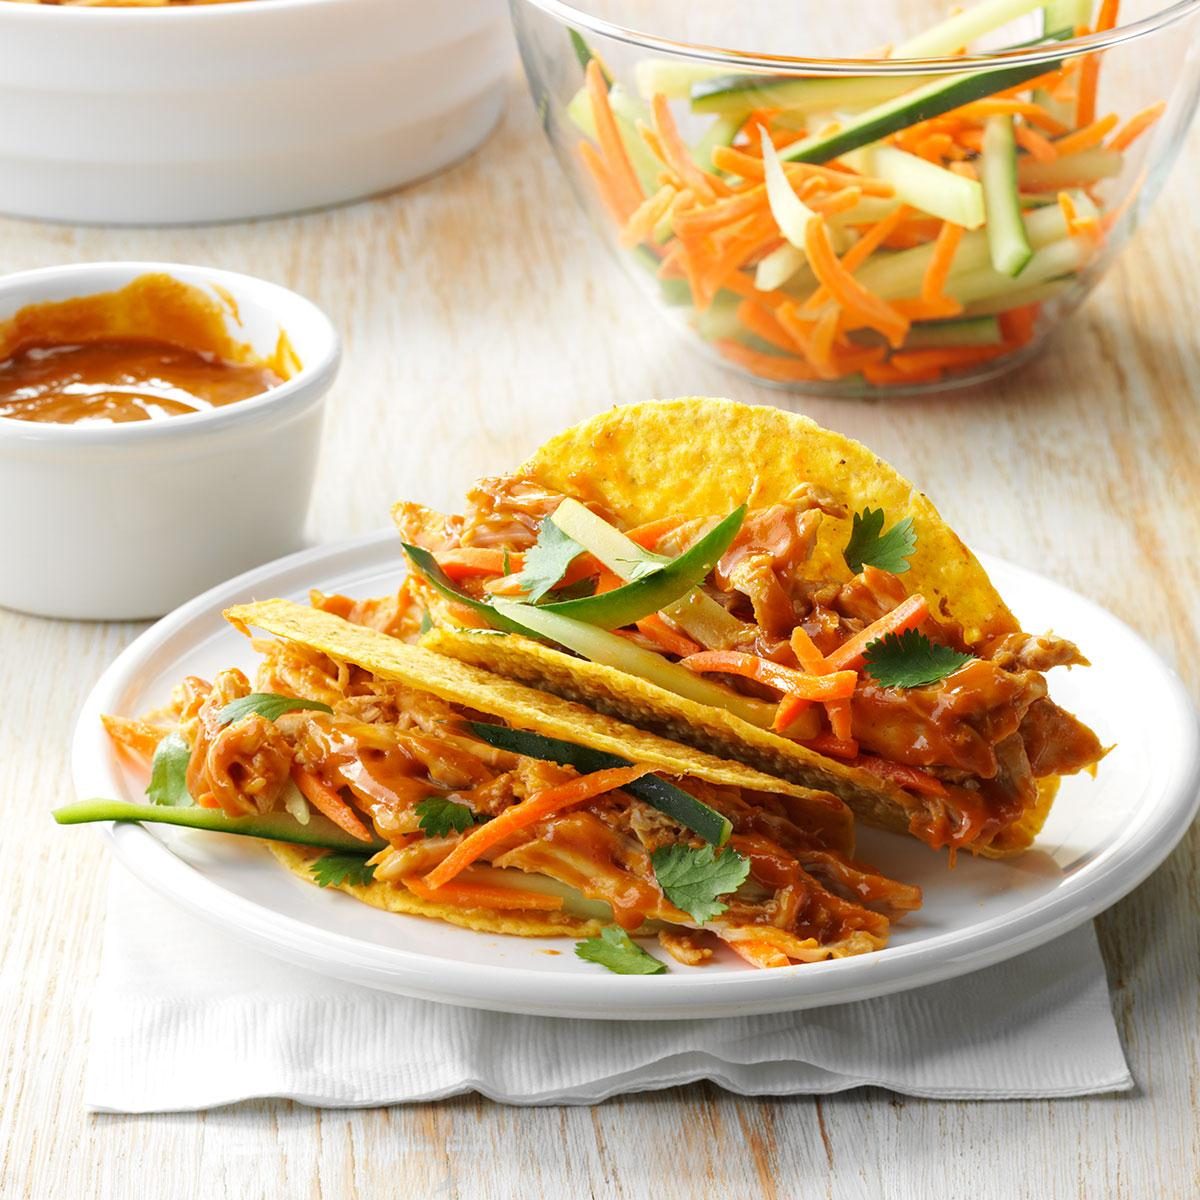 <p>Inspired by a Vietnamese banh mi sandwich, this recipe is an awesome way to use leftover chicken. If you have a little extra time, let the carrot and cucumber marinate in some rice vinegar before taco time. —Melissa Halonen, Spokane, Washington</p> <div class="listicle-page__buttons"> <div class="listicle-page__cta-button"><a href='https://www.tasteofhome.com/recipes/thai-chicken-tacos/'>Get Recipe</a></div> </div>